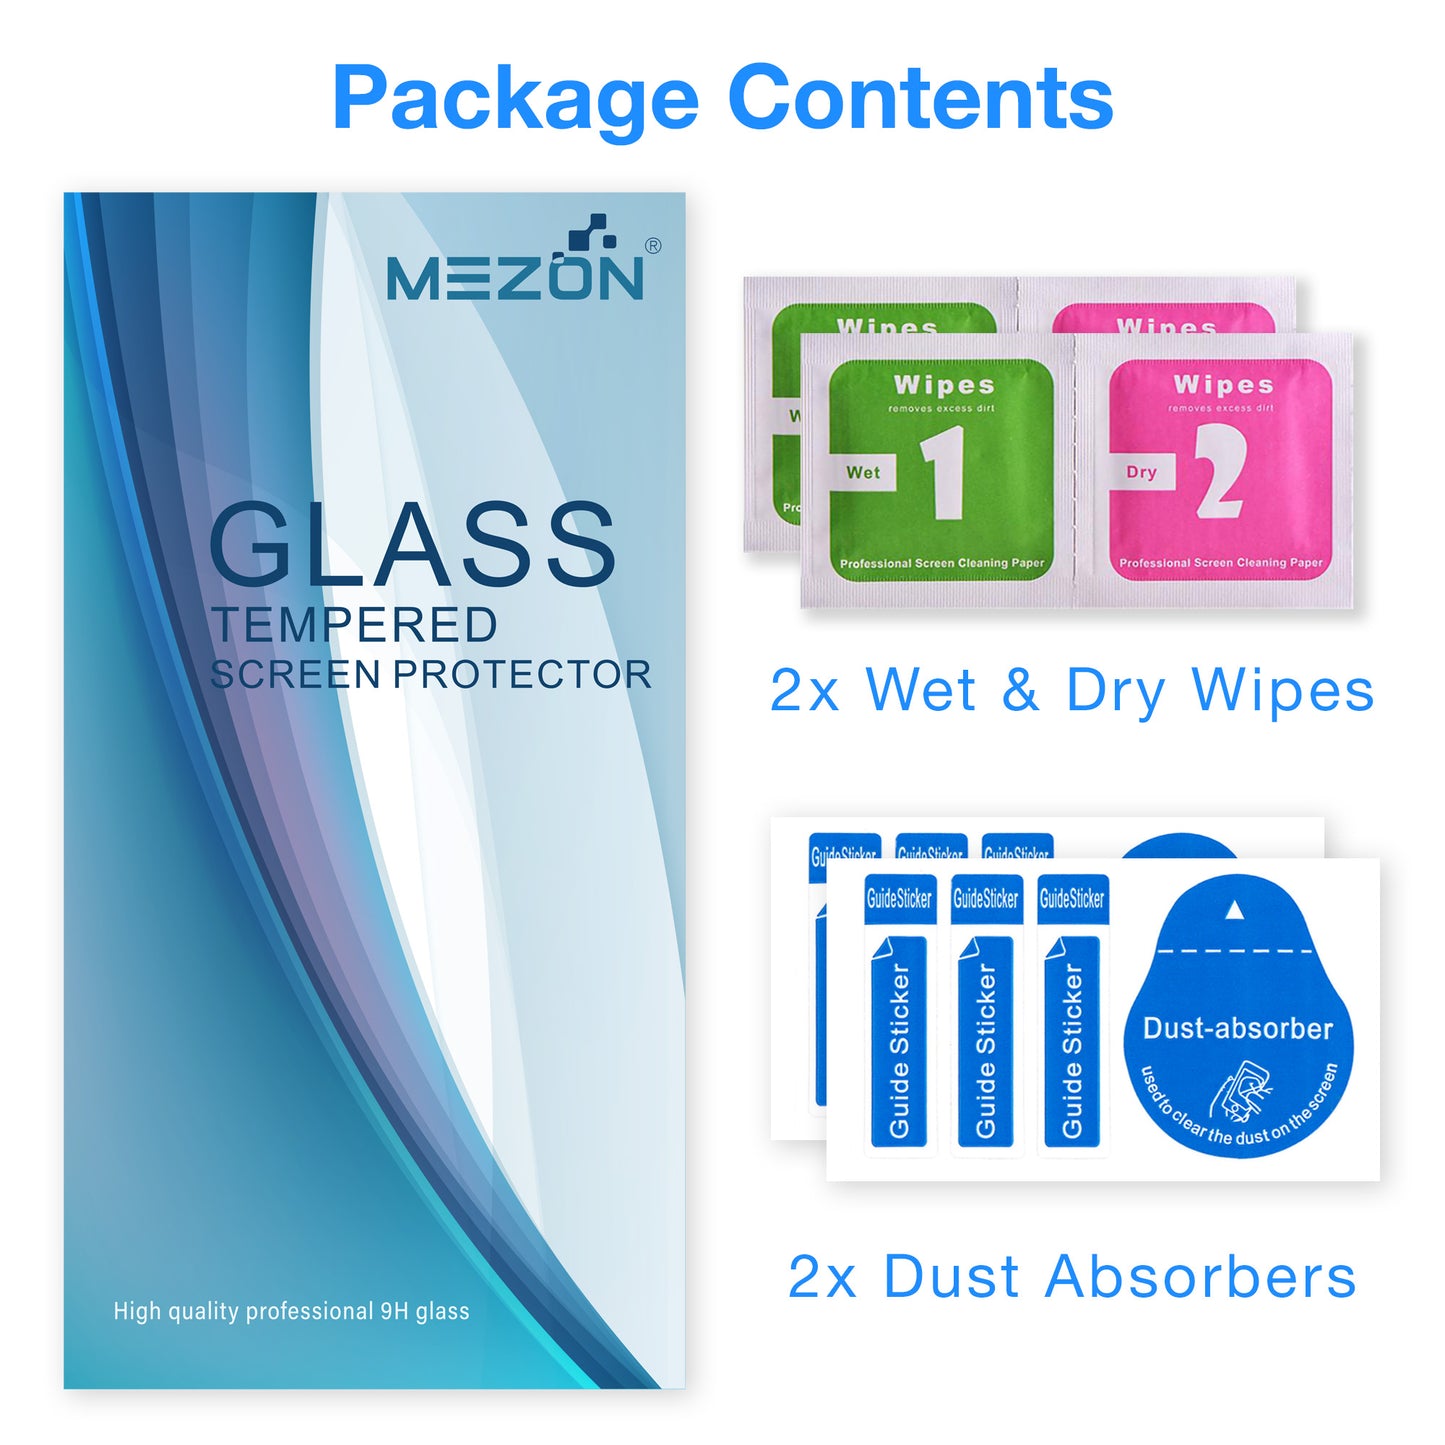 [2 Pack] MEZON Full Coverage Samsung Galaxy A52 Tempered Glass Crystal Clear Premium 9H HD Screen Protector (A52, 9H Full)